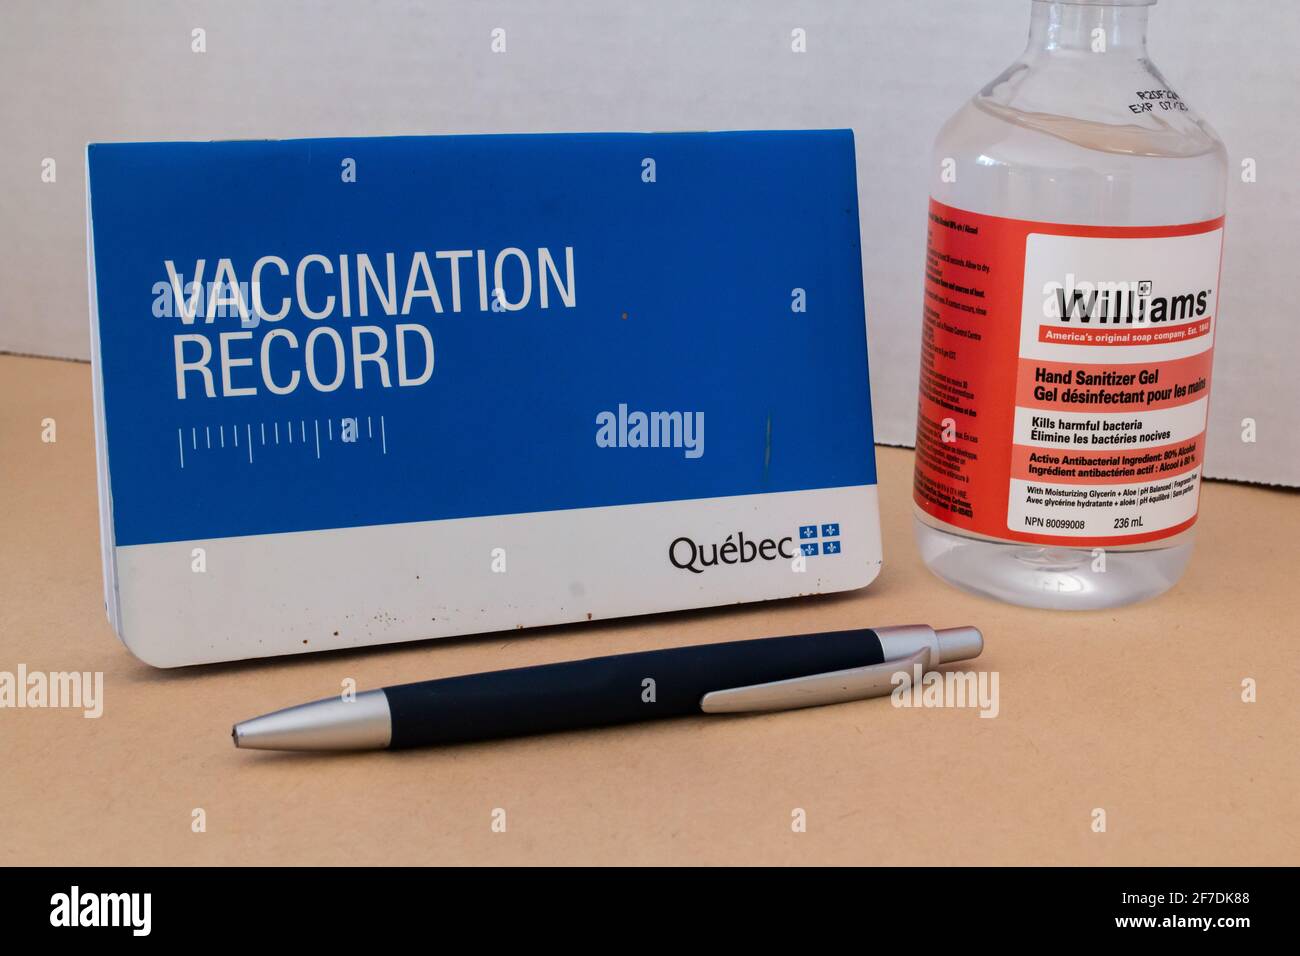 Toronto, Ontario, Canada - February 2 2021: A Quebec vaccination record booklet next to a bottle of hand sanitizer and a pen. Stock Photo